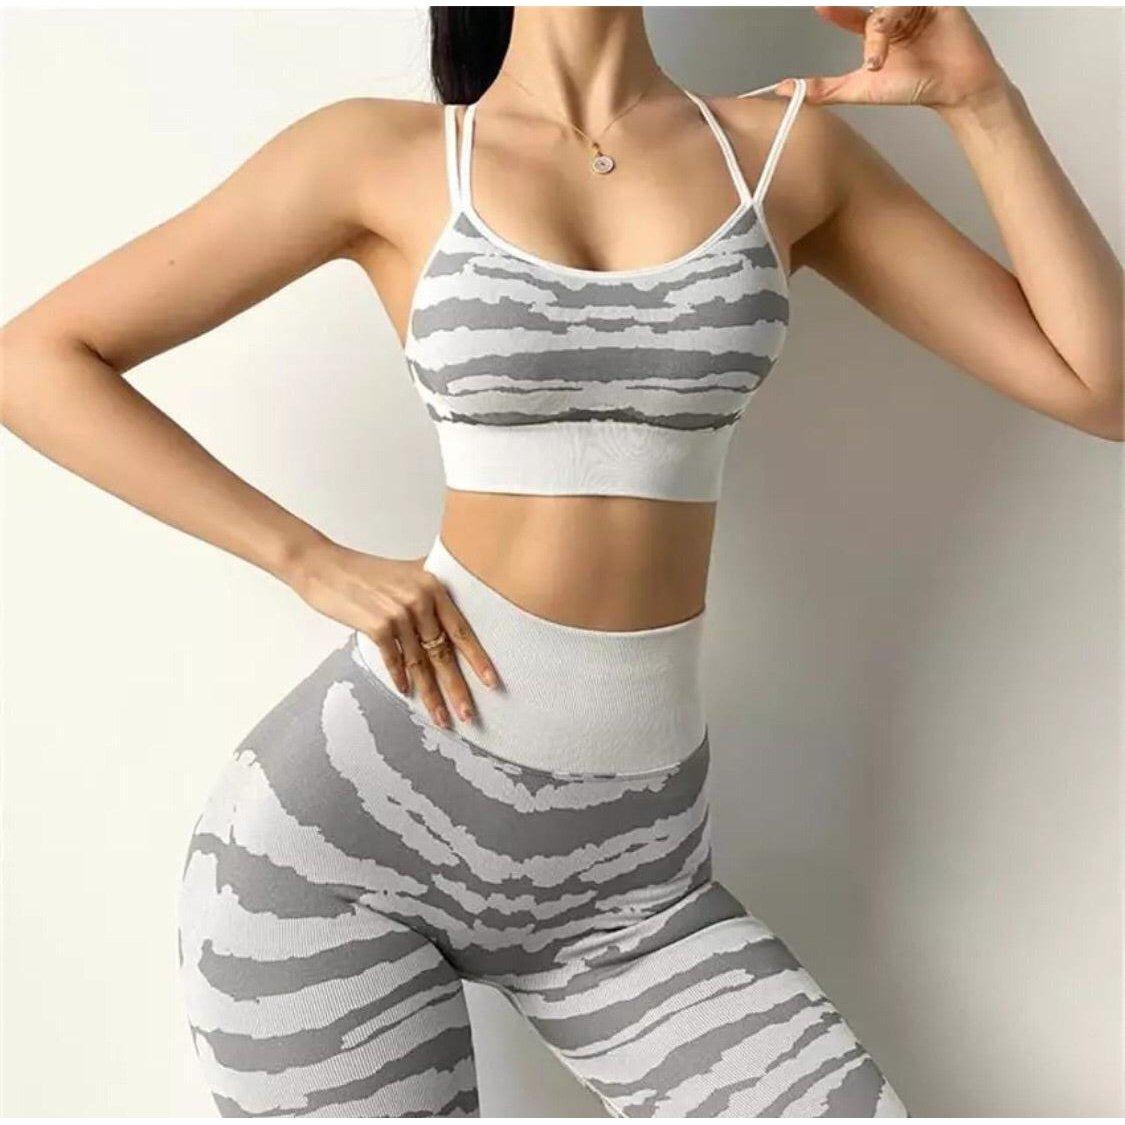 CAN'T BE TAMED ZEBRA SCRUNCH SET - 2 Colorways